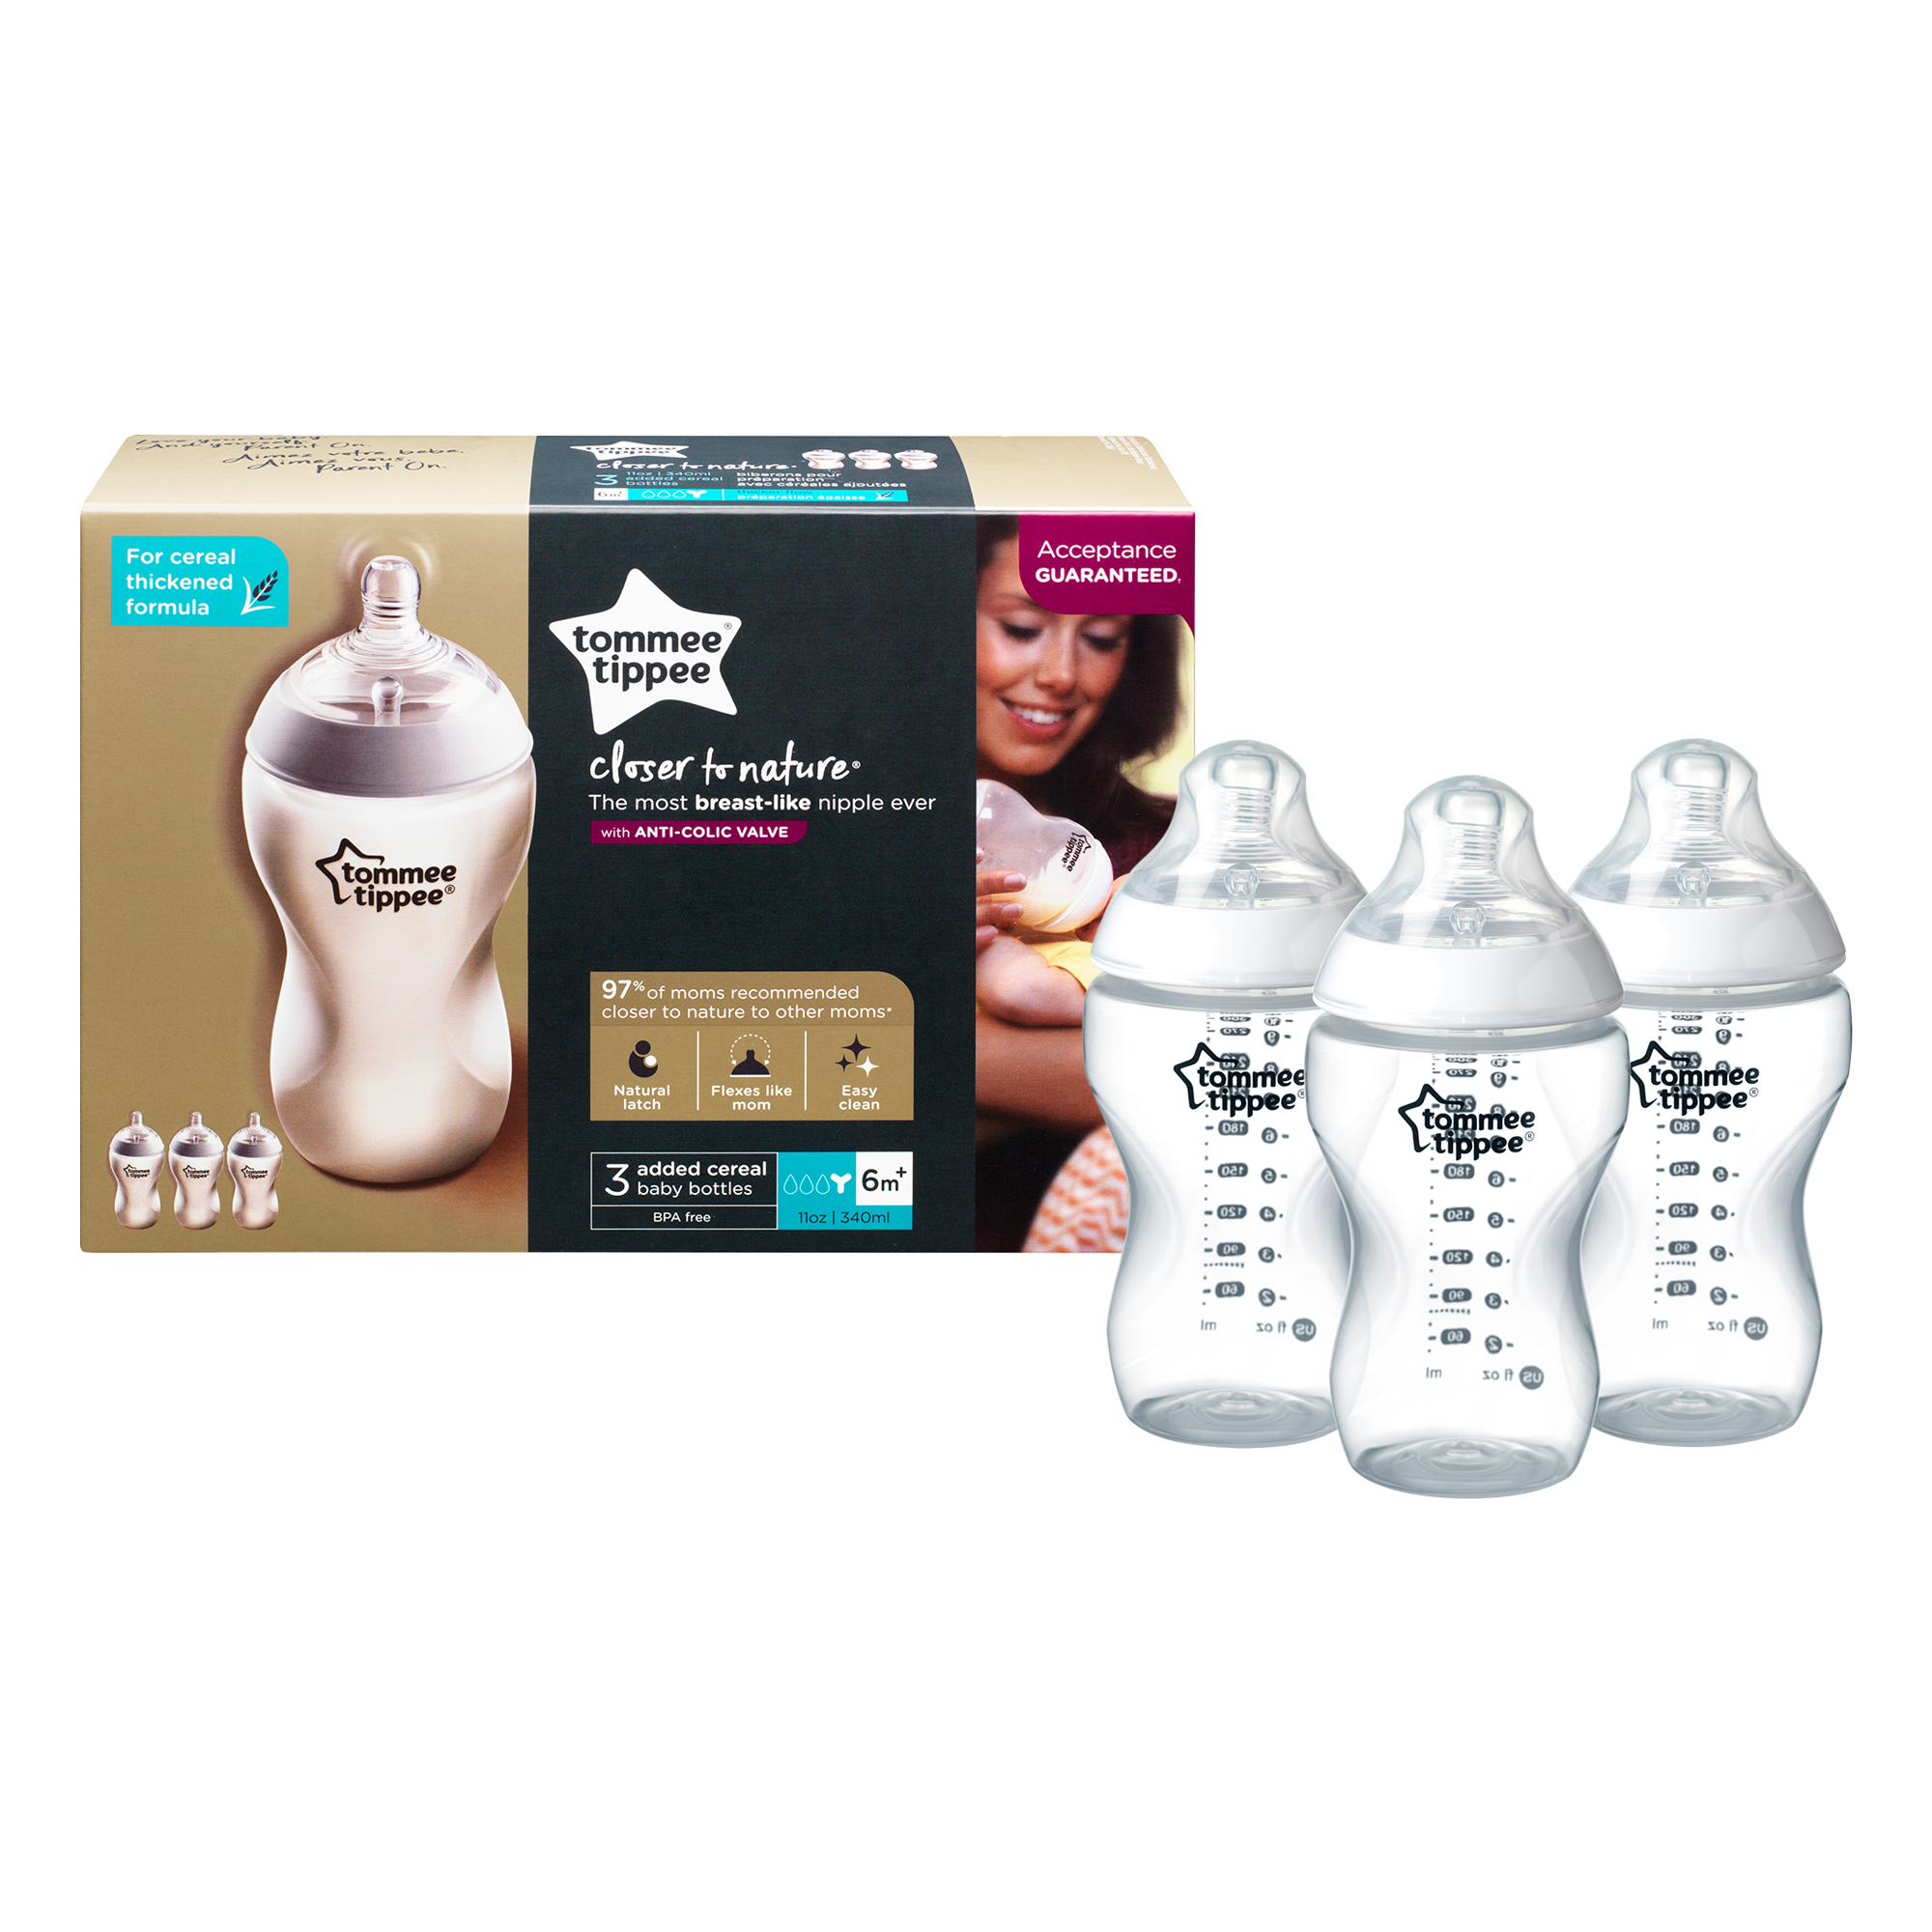 https://www.babyology.com.pe/wp-content/uploads/2020/10/Tommee-tippee-closer-to-nature-packx3-11-oz..jpg